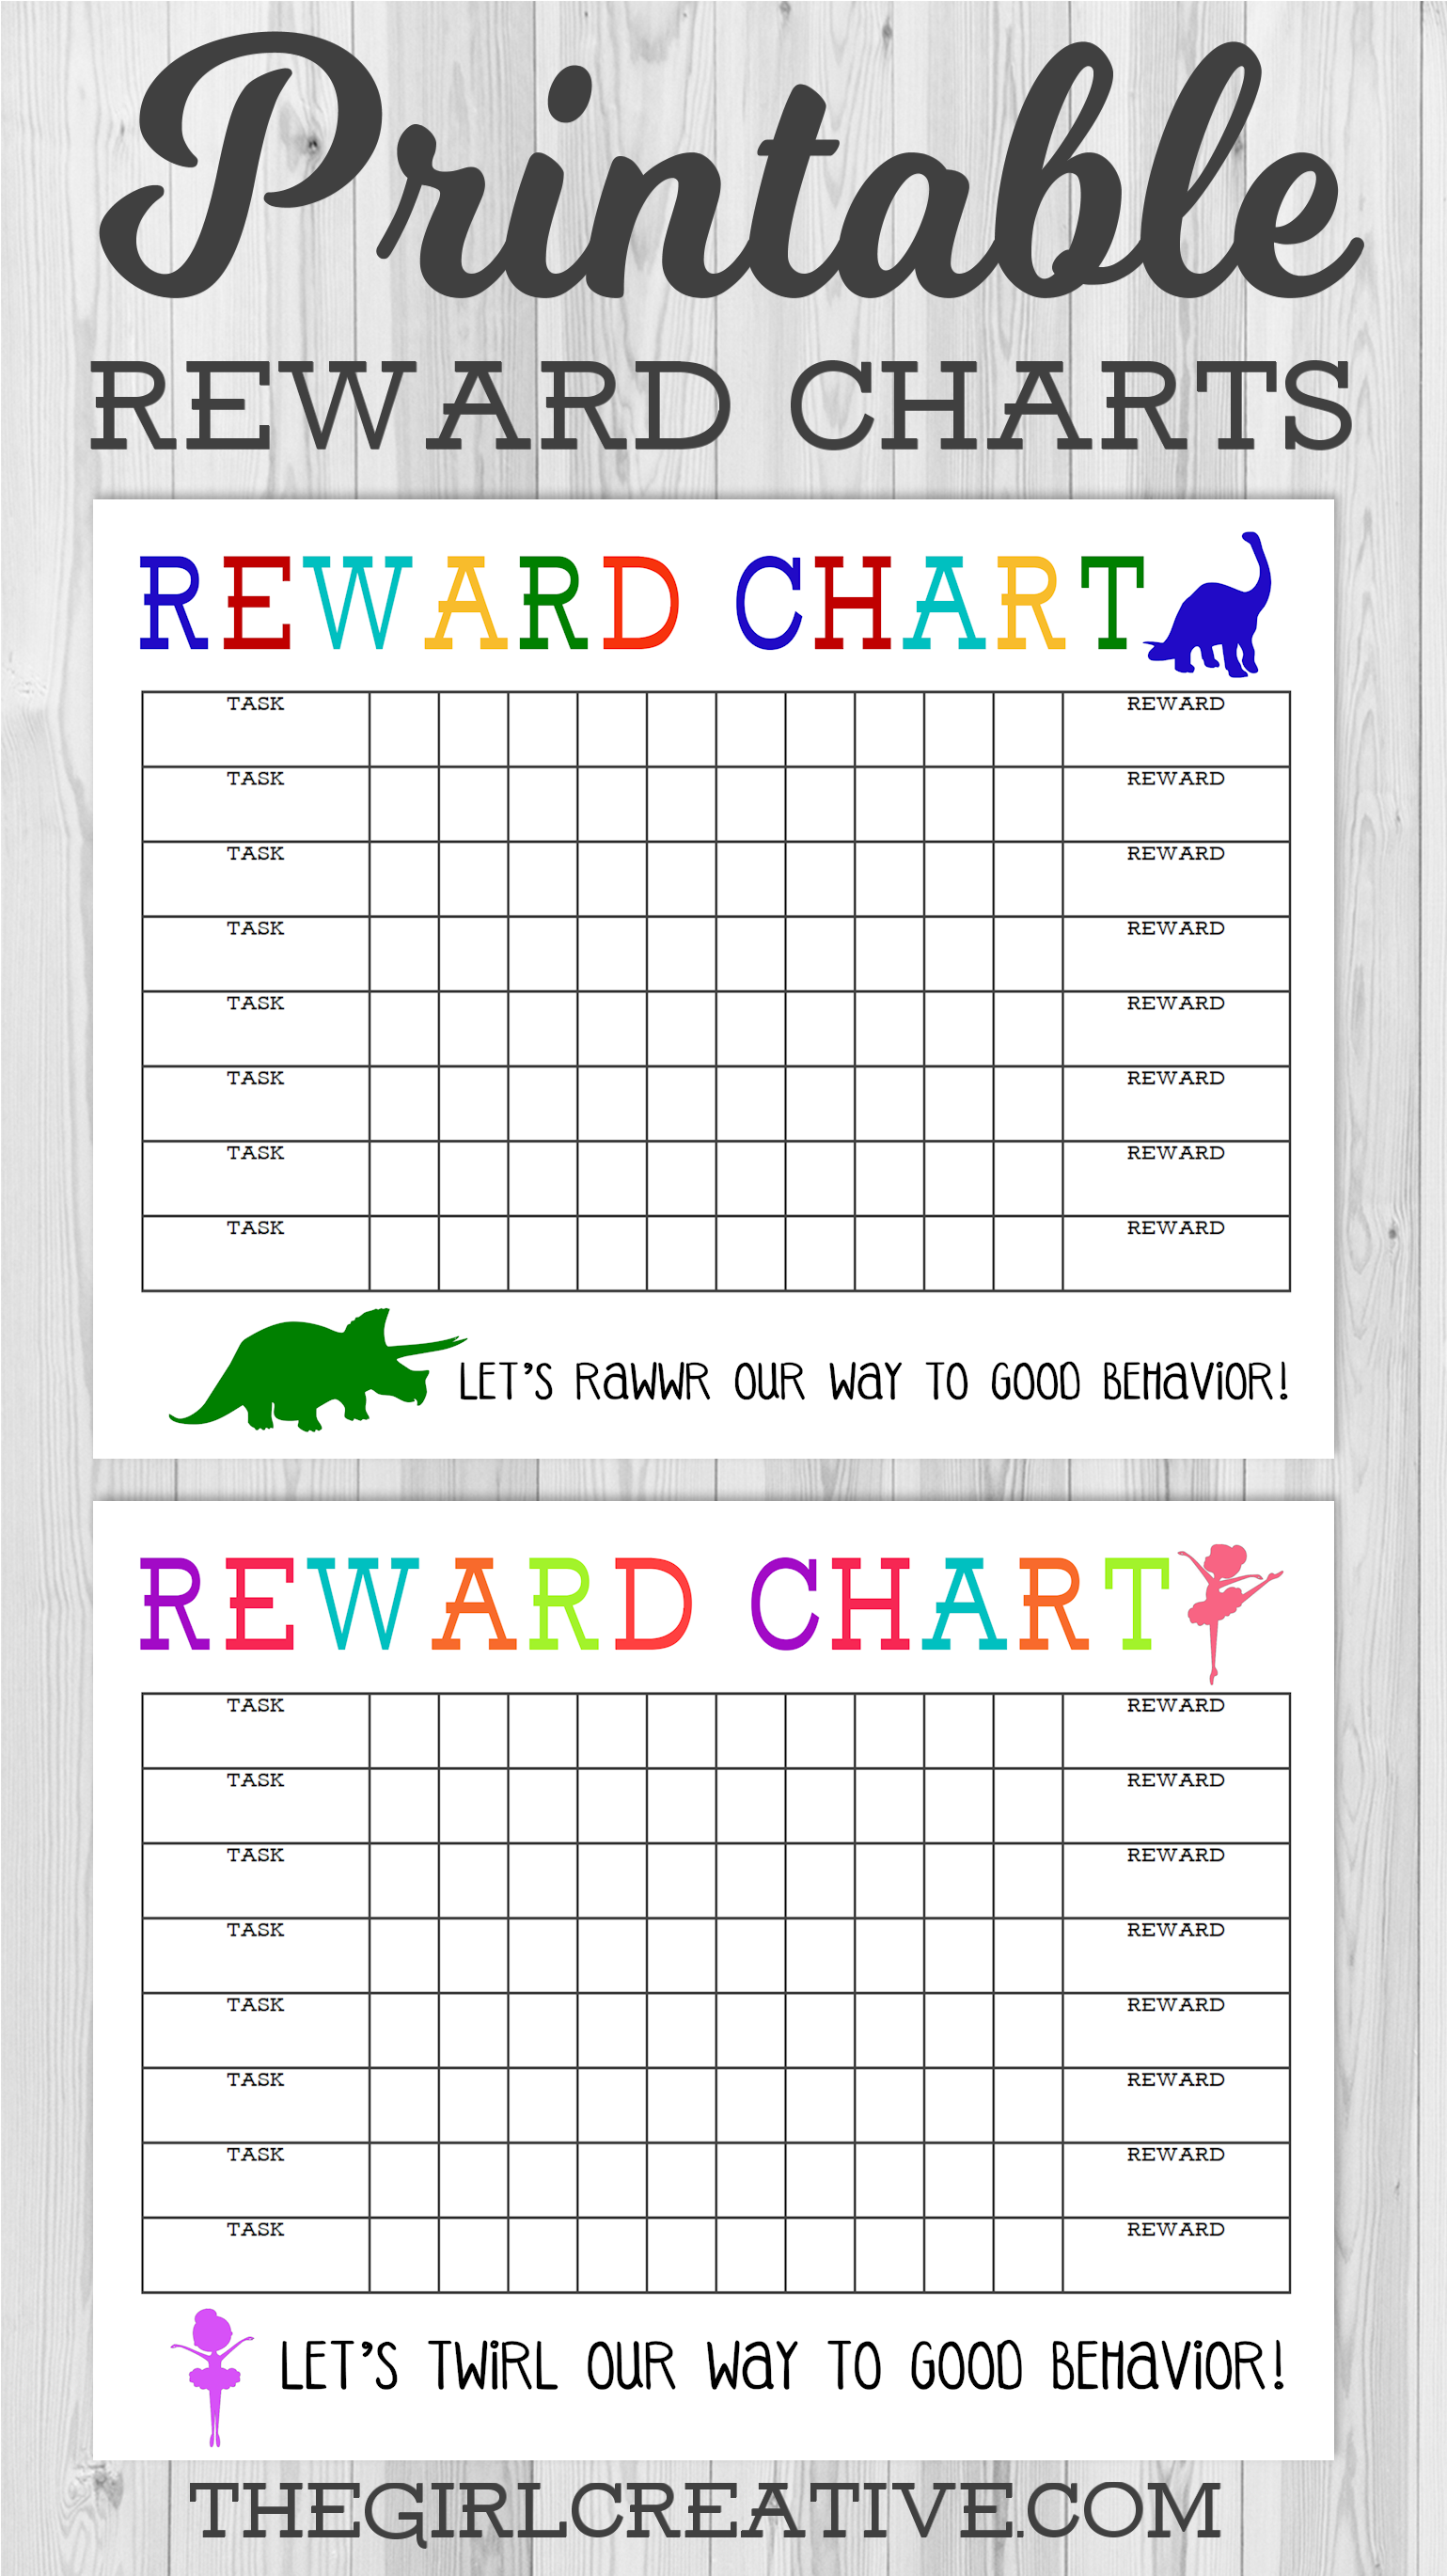 Printable Reward Chart | Share Today's Craft and DIY Ideas 